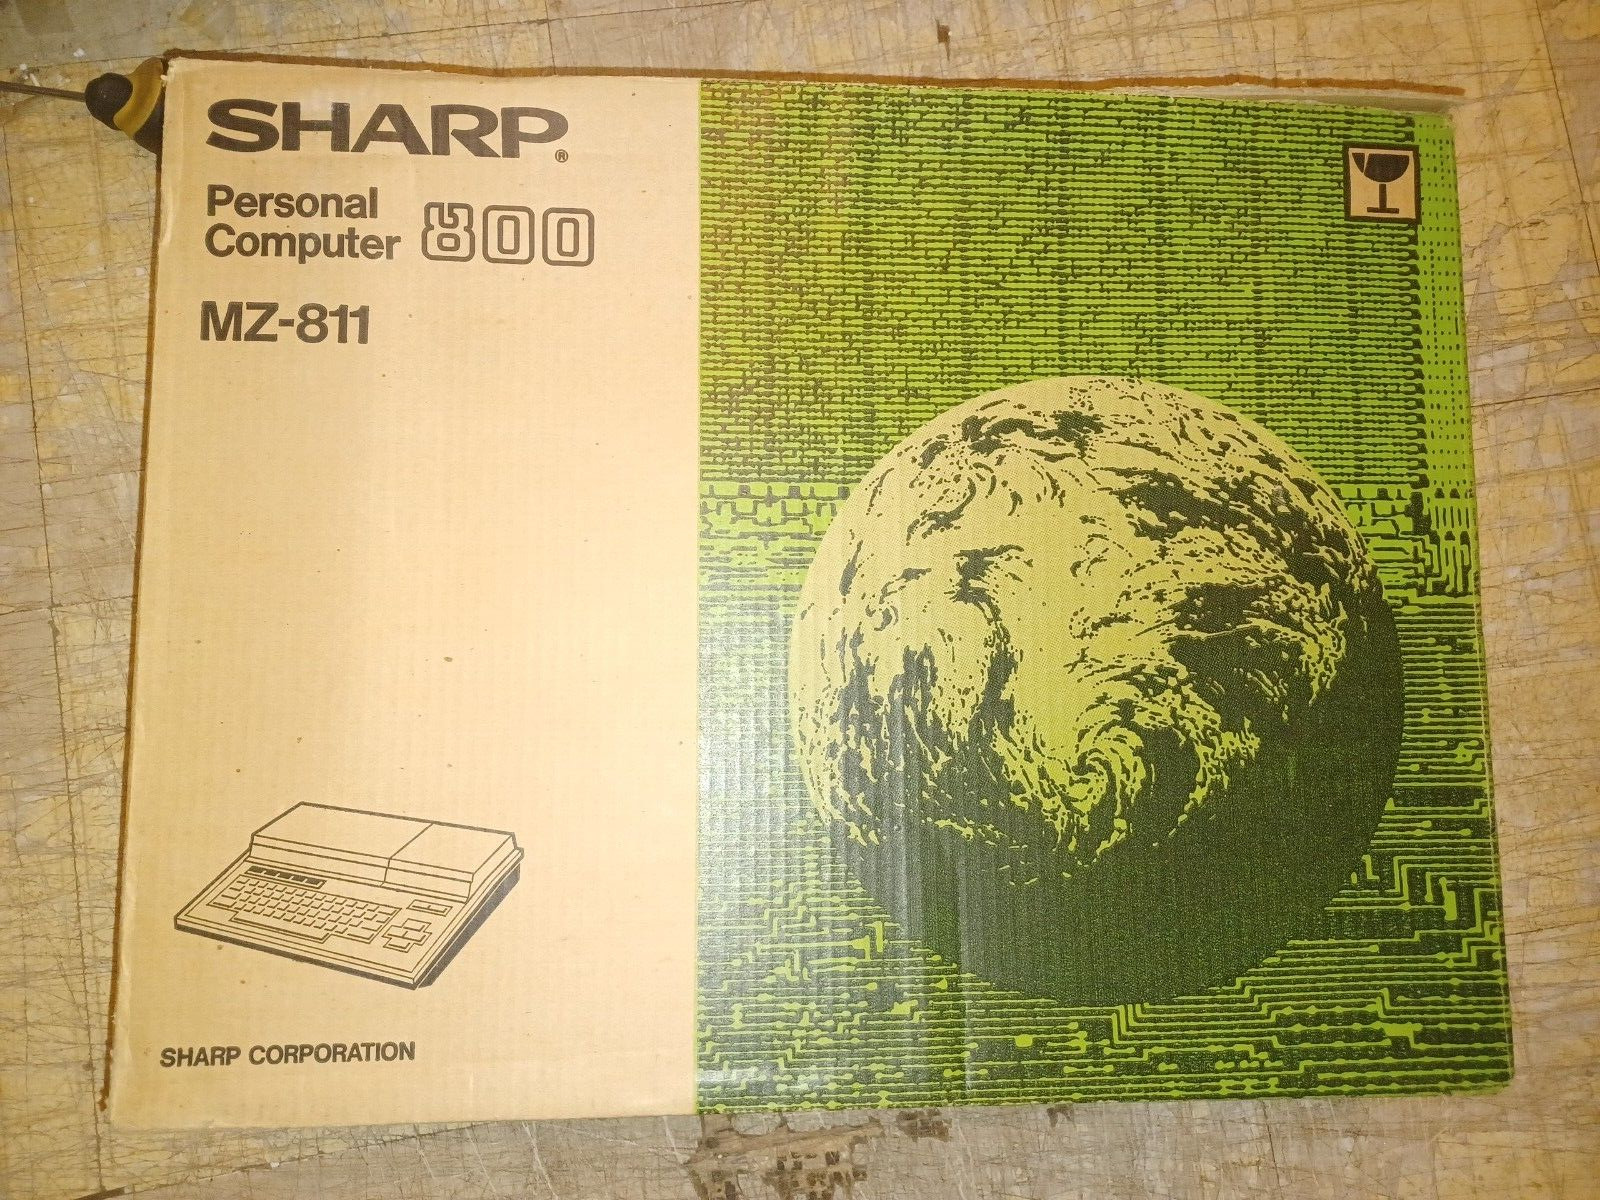 Rare SHARP MZ-811 Computer - working with box and manual